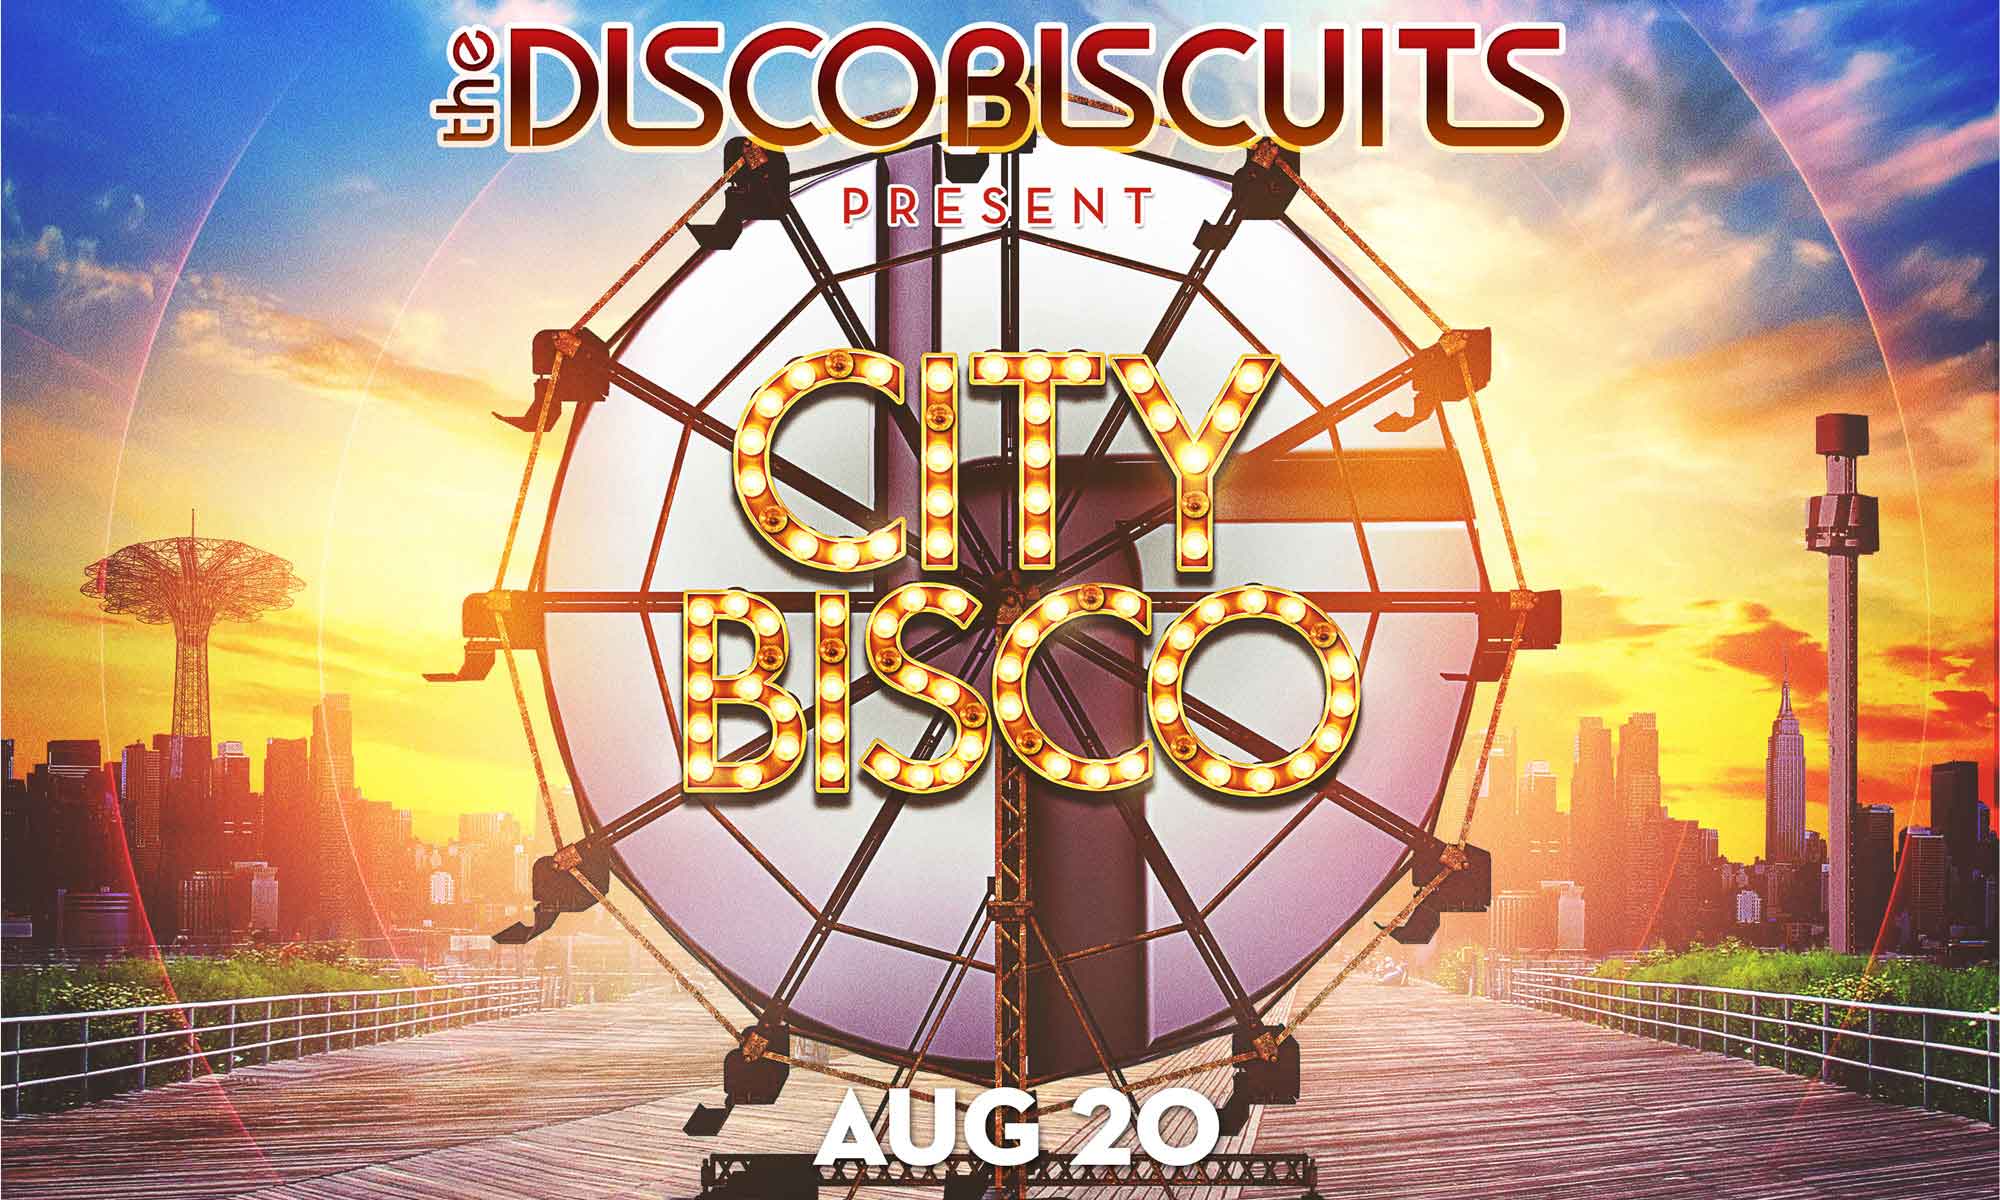 The Disco Biscuits present City Bisco at Coney Island Amphitheater on 08-20-16